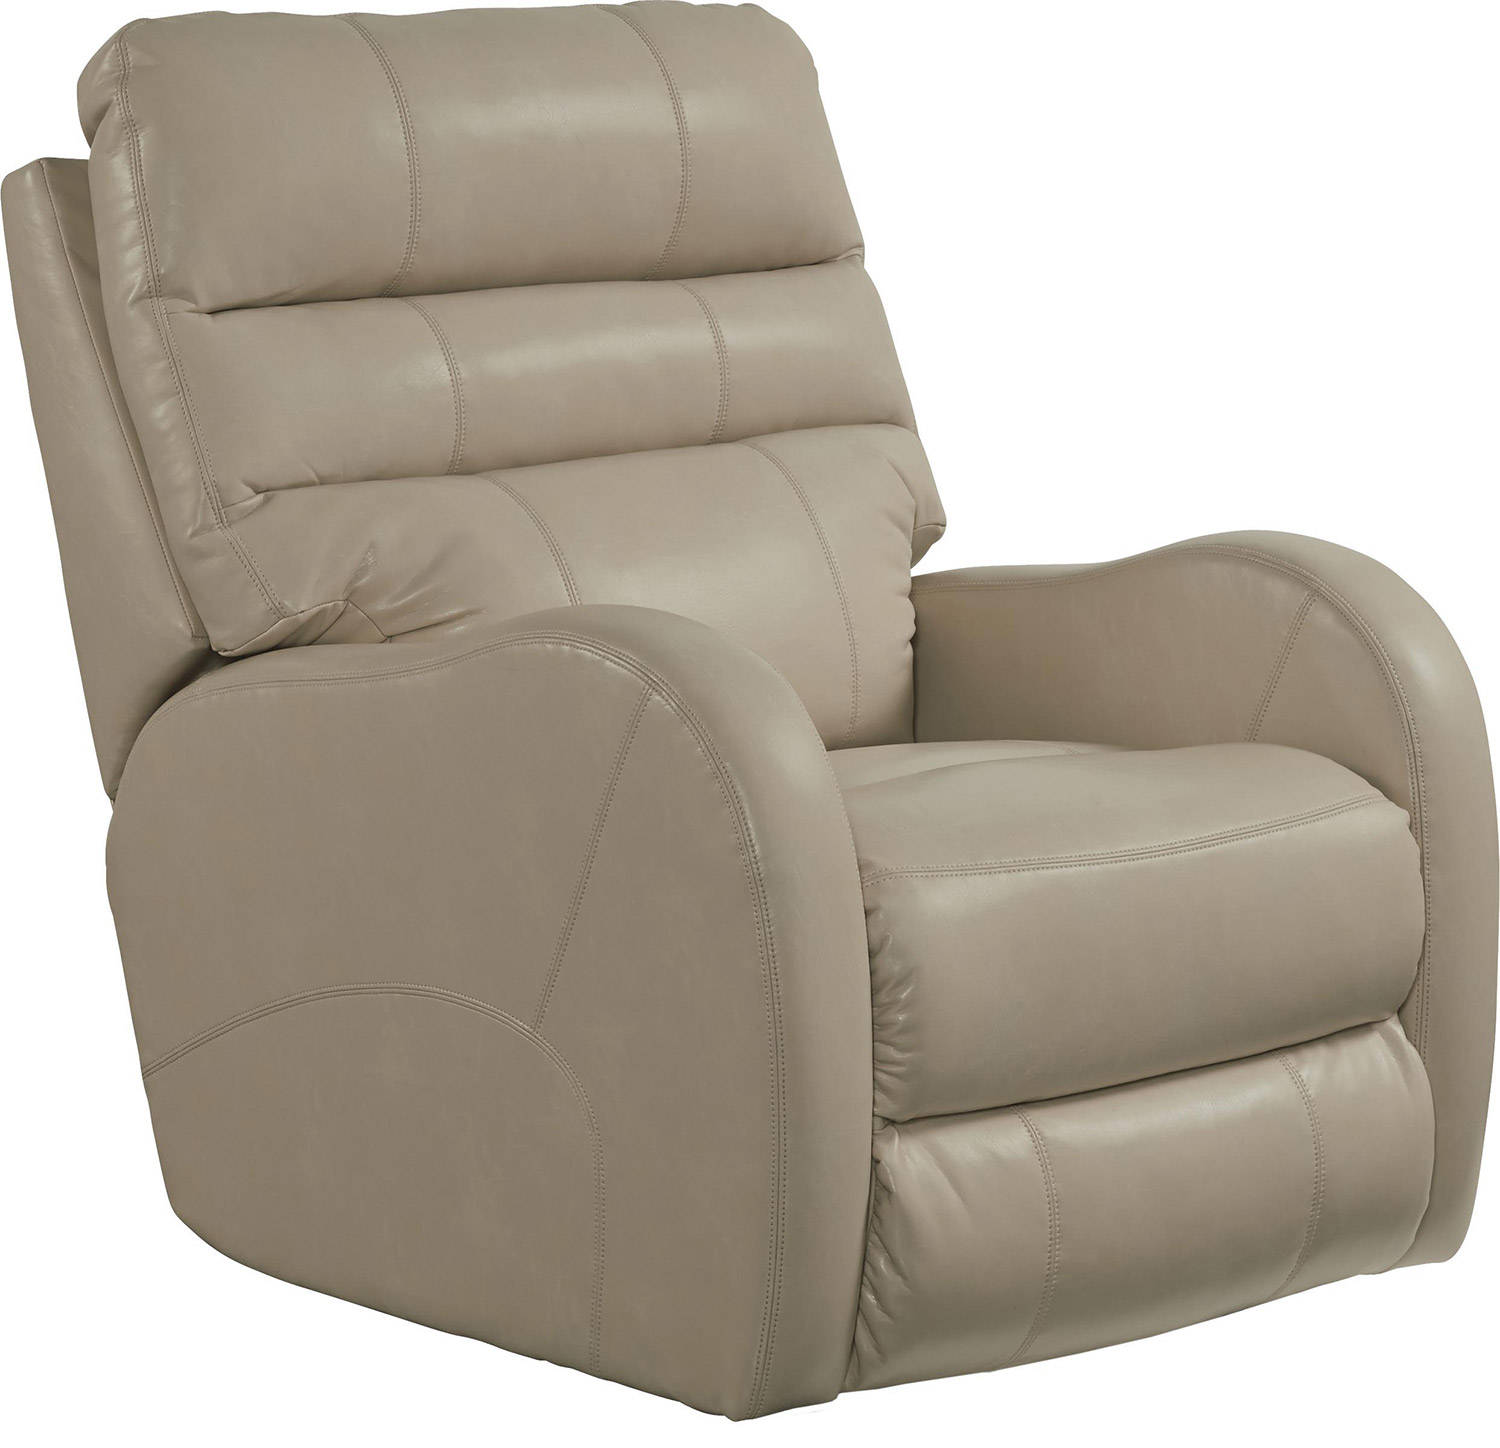 CatNapper Searcy Rocker Recliner Chair - Parchment